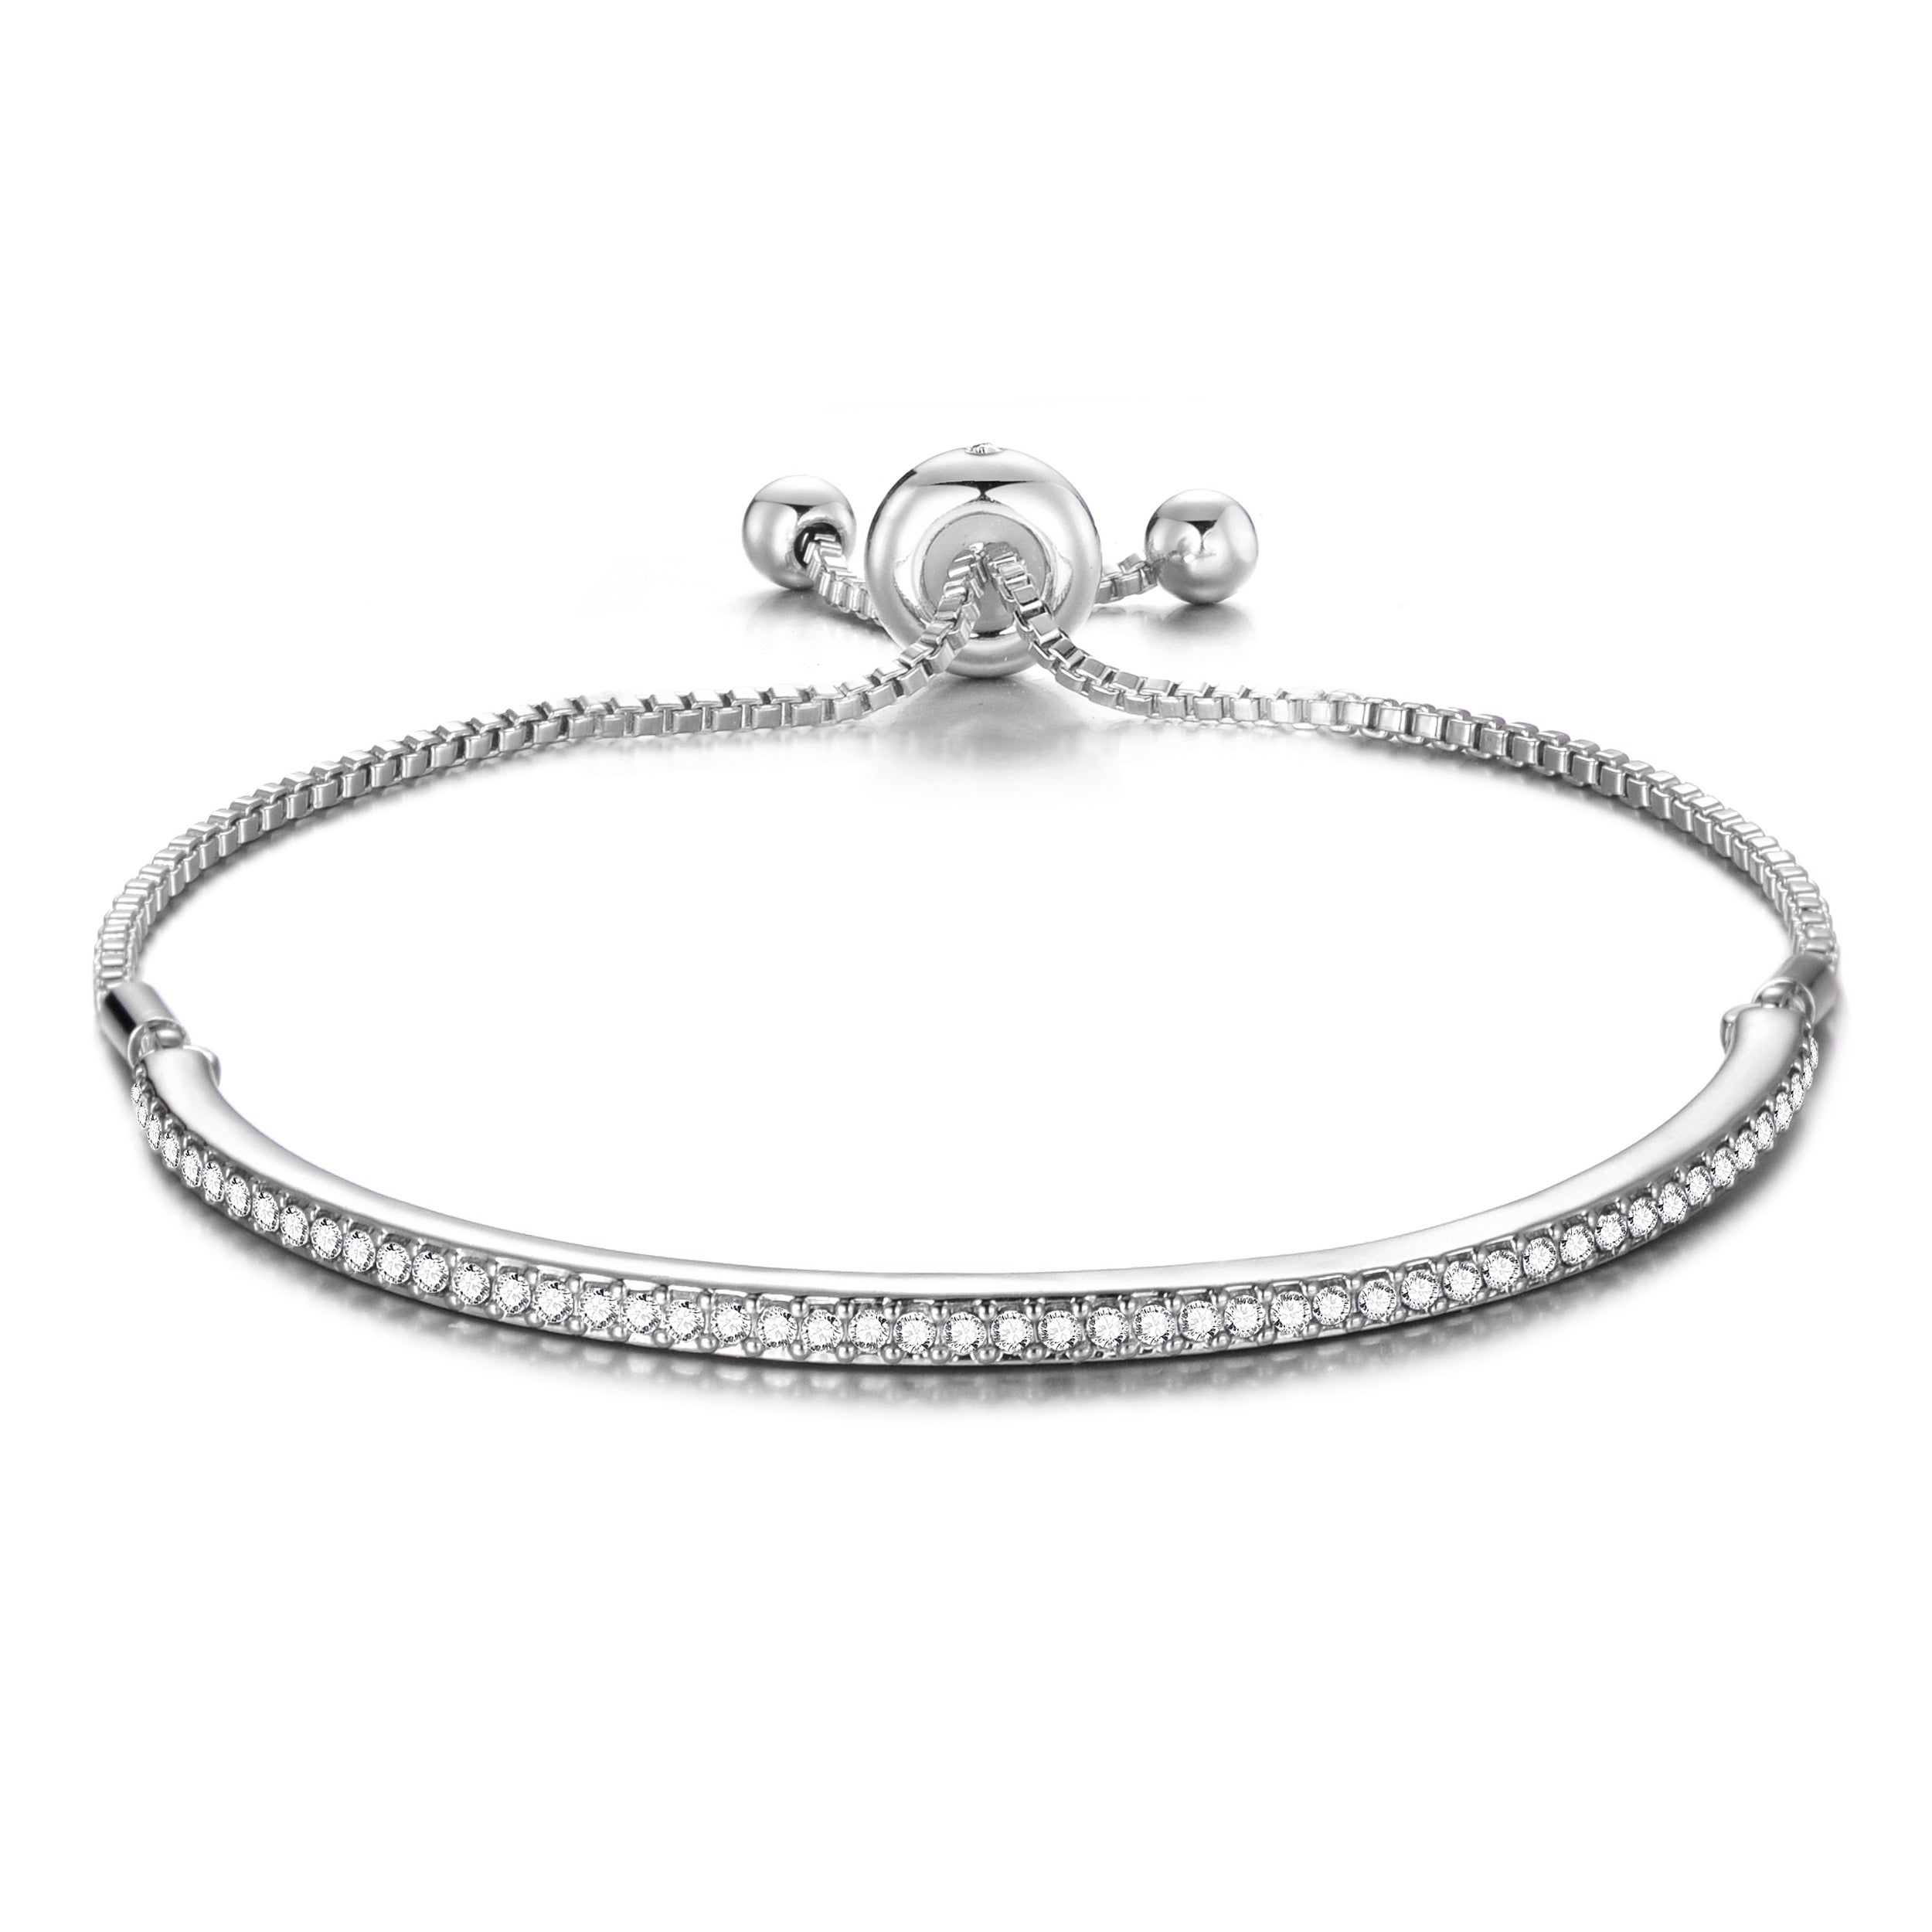 Silver Plated Friendship Bracelet Created with Zircondia® Crystals by Philip Jones Jewellery